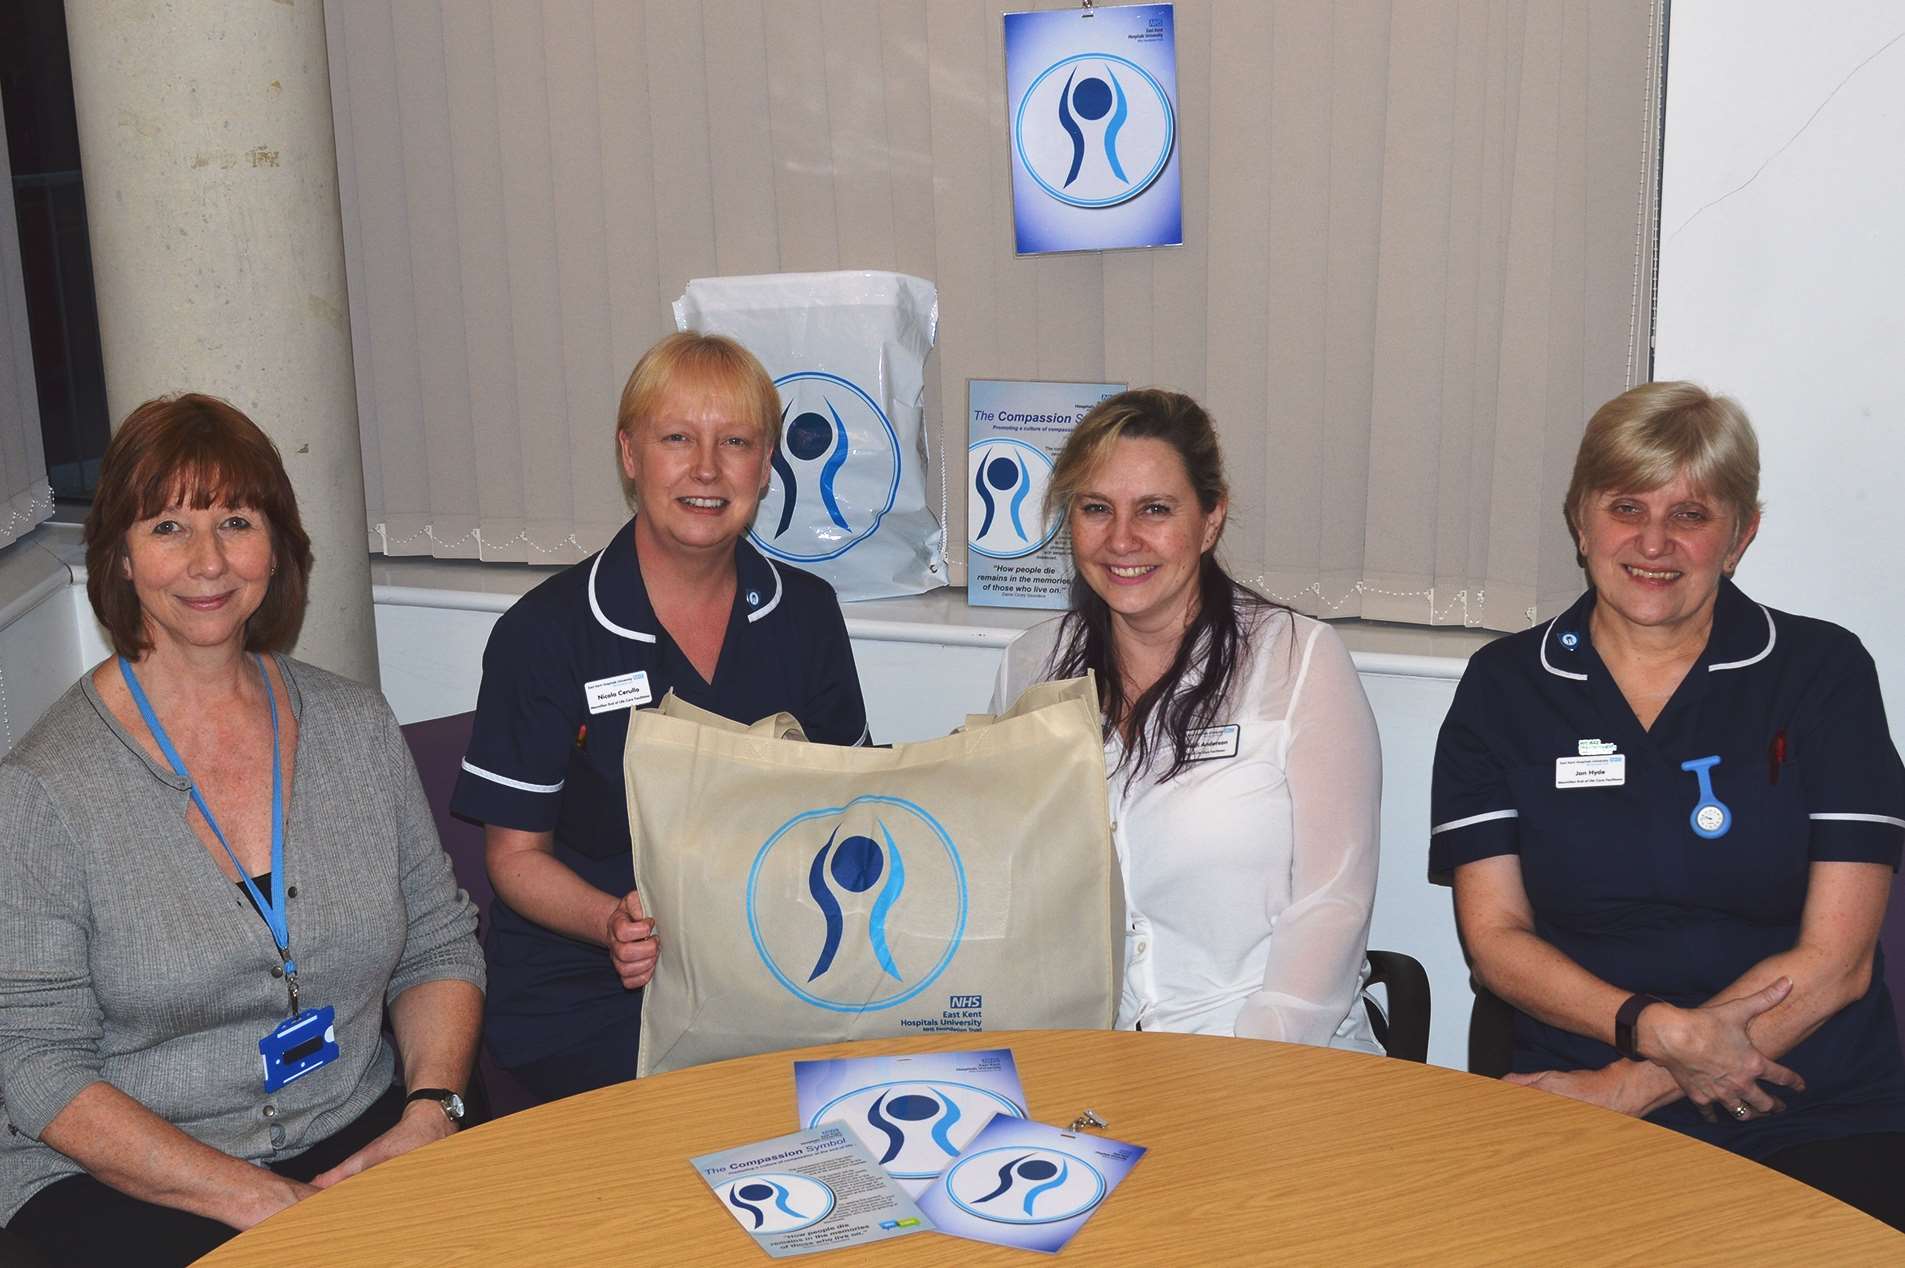 Hospice staff and nurses with the 'compassion' signs